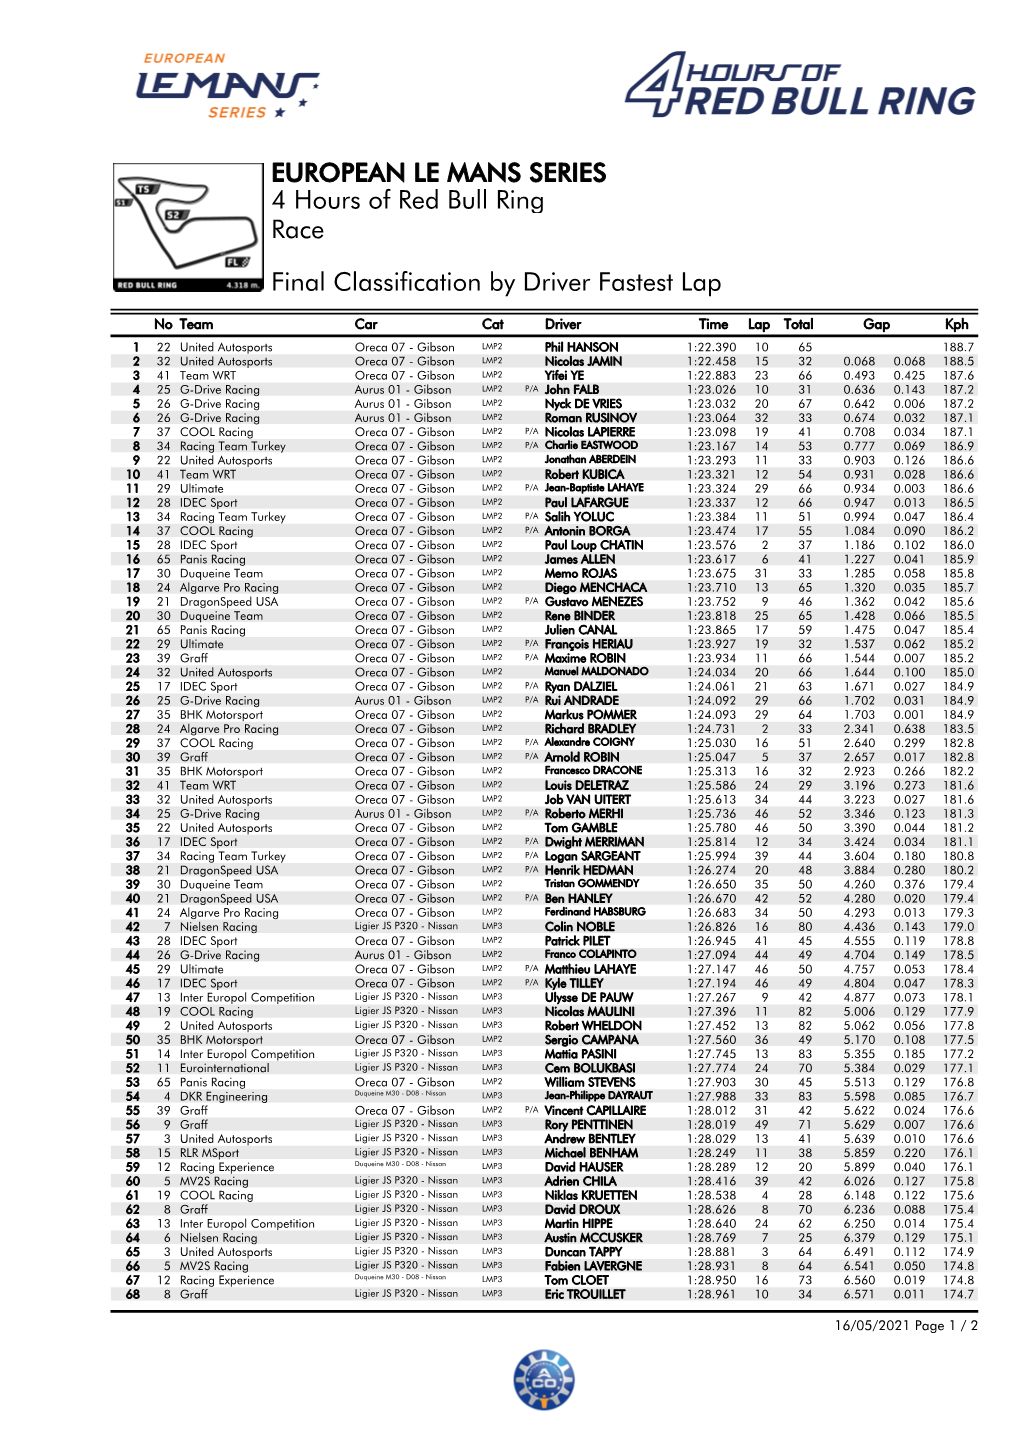 Final Classification by Driver Fastest Lap Race 4 Hours of Red Bull